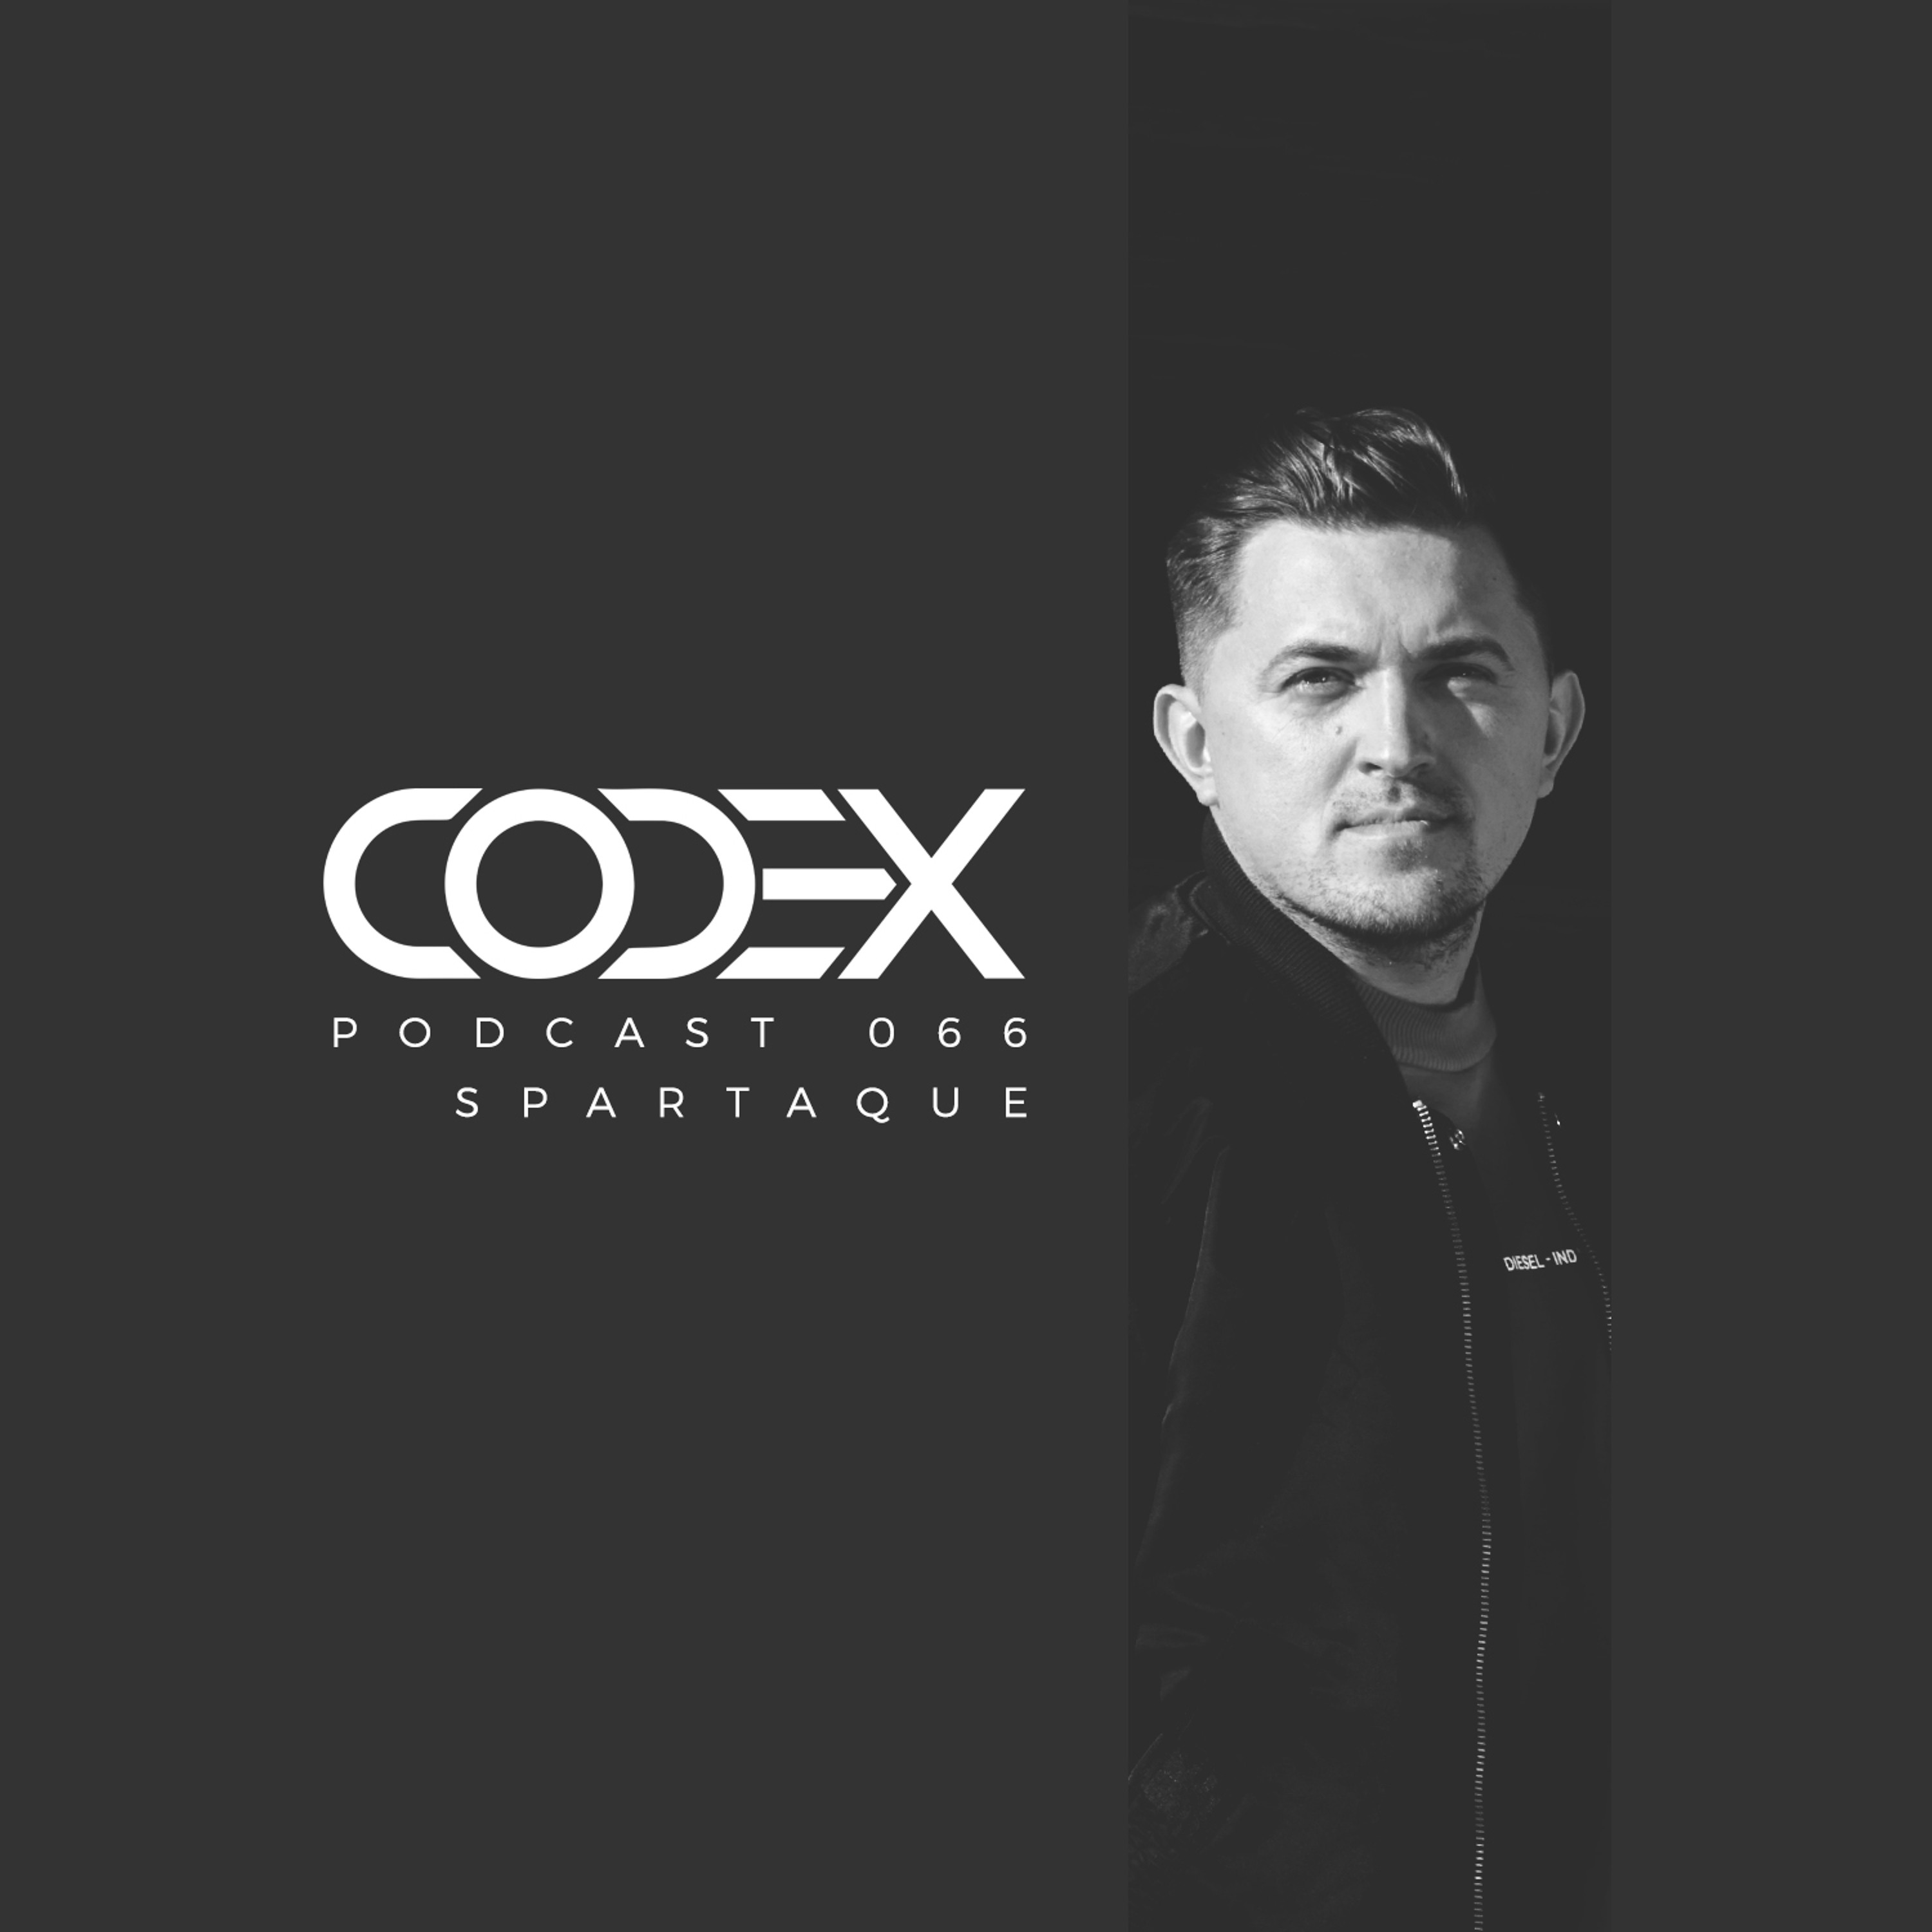 Codex Podcast 066 with Spartaque [Taktlos Event, Essen, Germany]